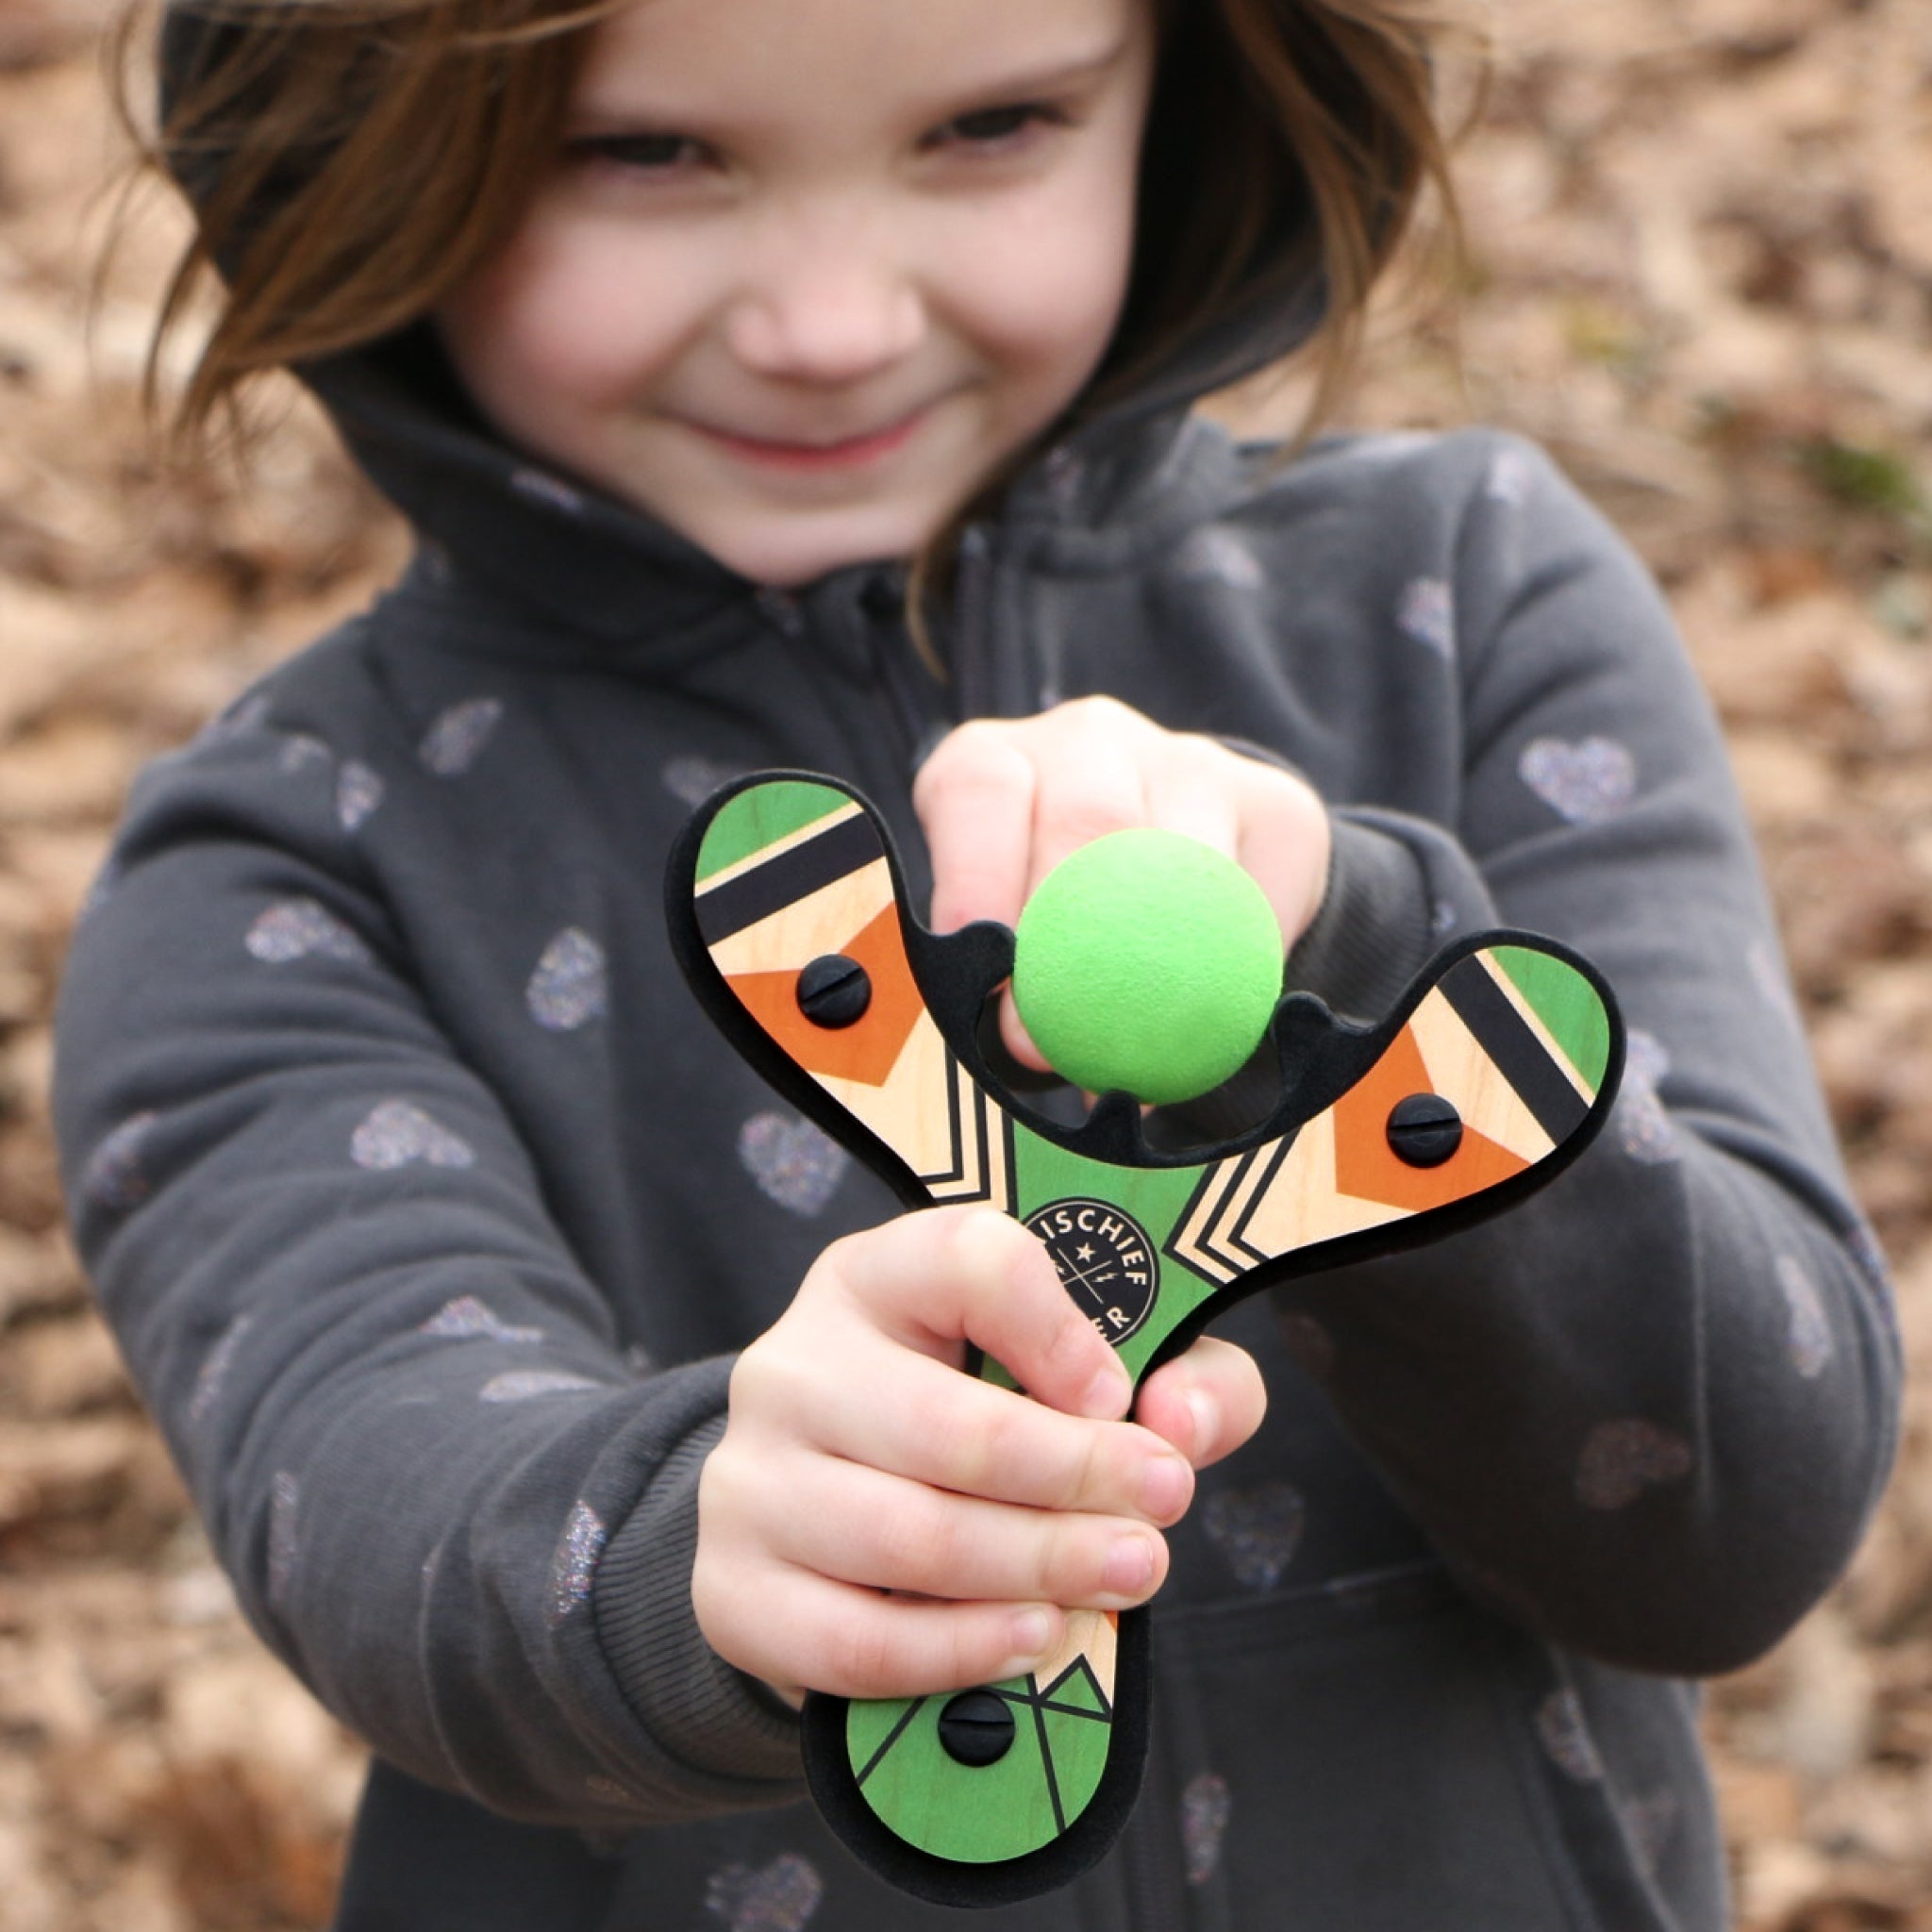 Green Classic wood slingshot being shot by 5 year old girl. Mischief Maker by Mighty Fun!